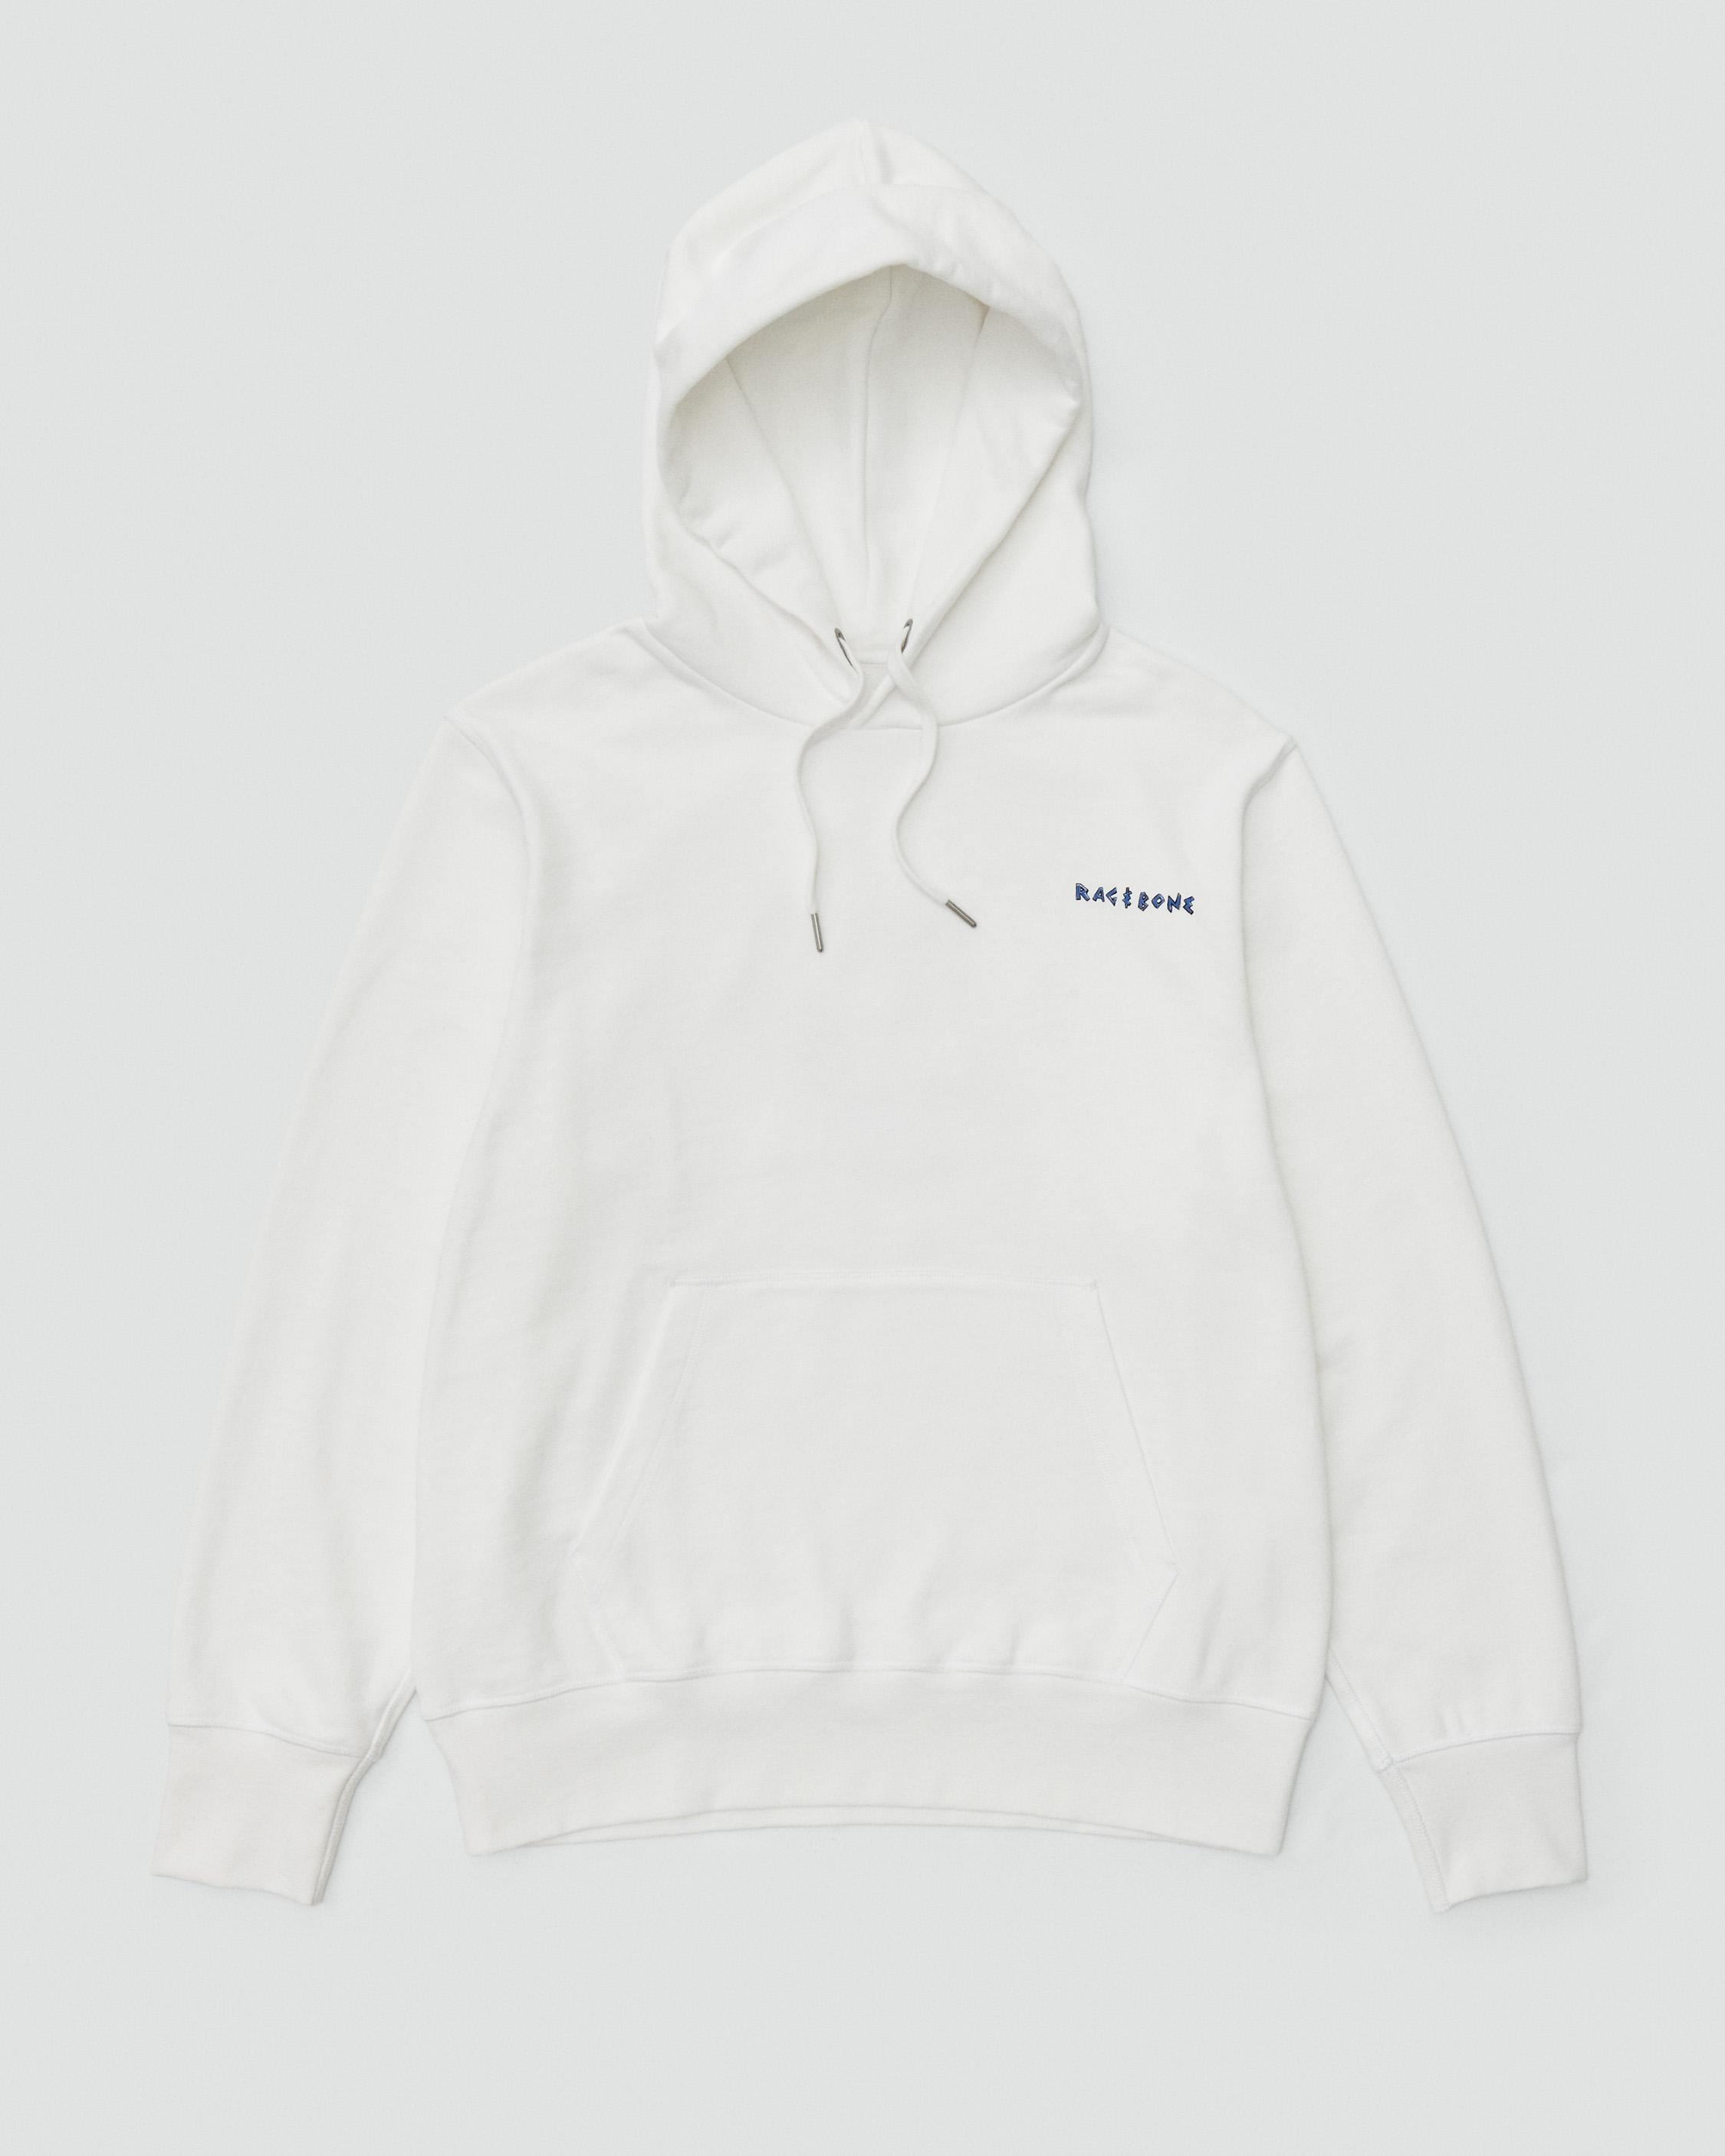 RBNY Coffee Terry Hoodie
Relaxed Fit - 1